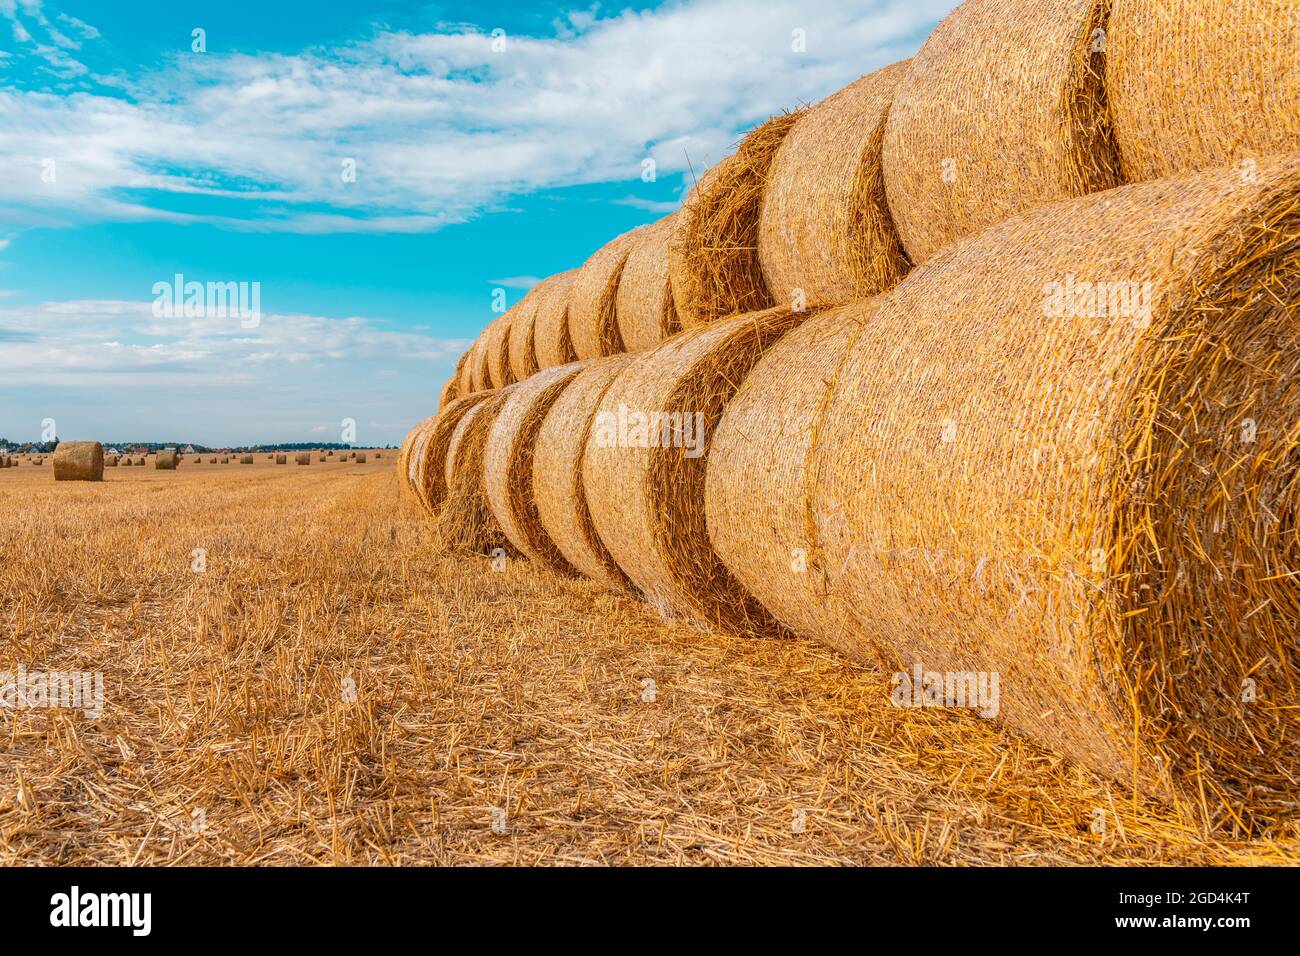 A field with straw bales after harvest on the sky background. Stock Photo